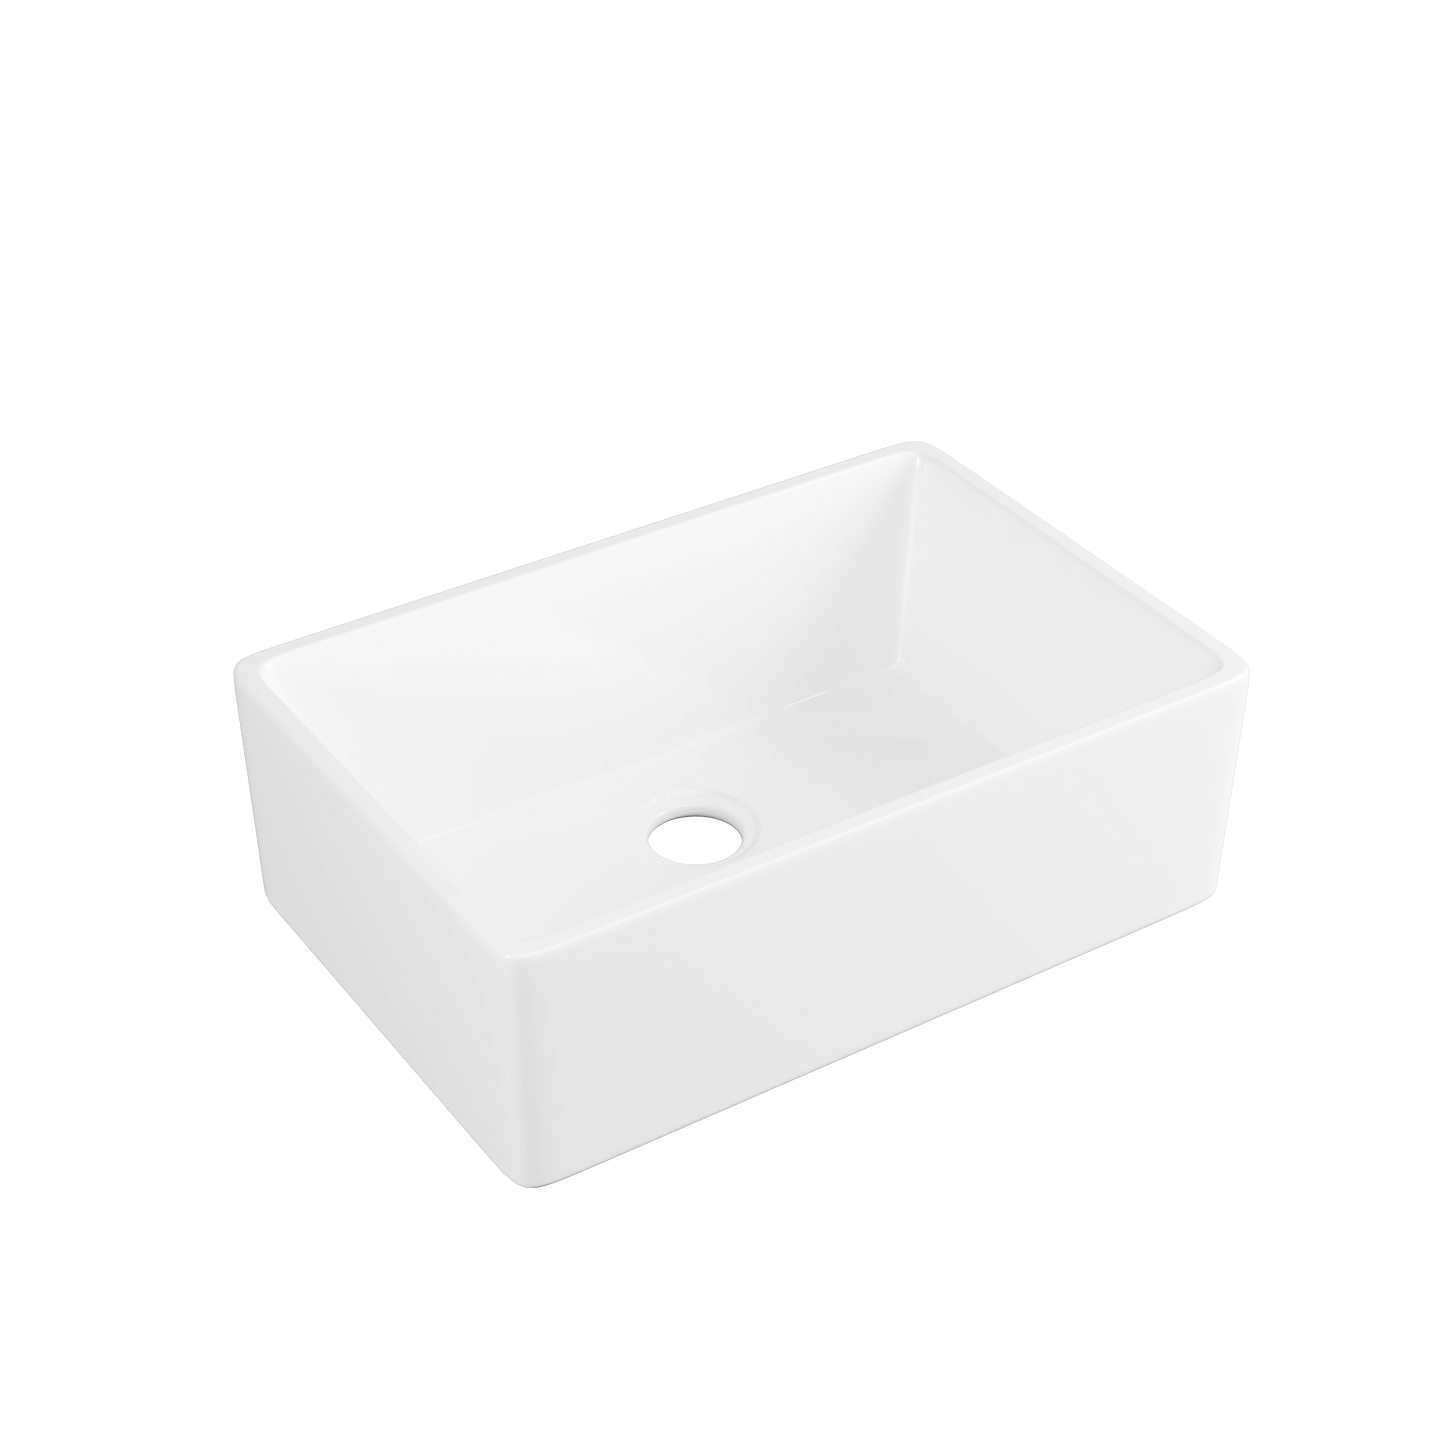 DeerValley 16" x 22" x 8" White Ceramic Farmhouse Single Kitchen Sink With Apron Front Designed